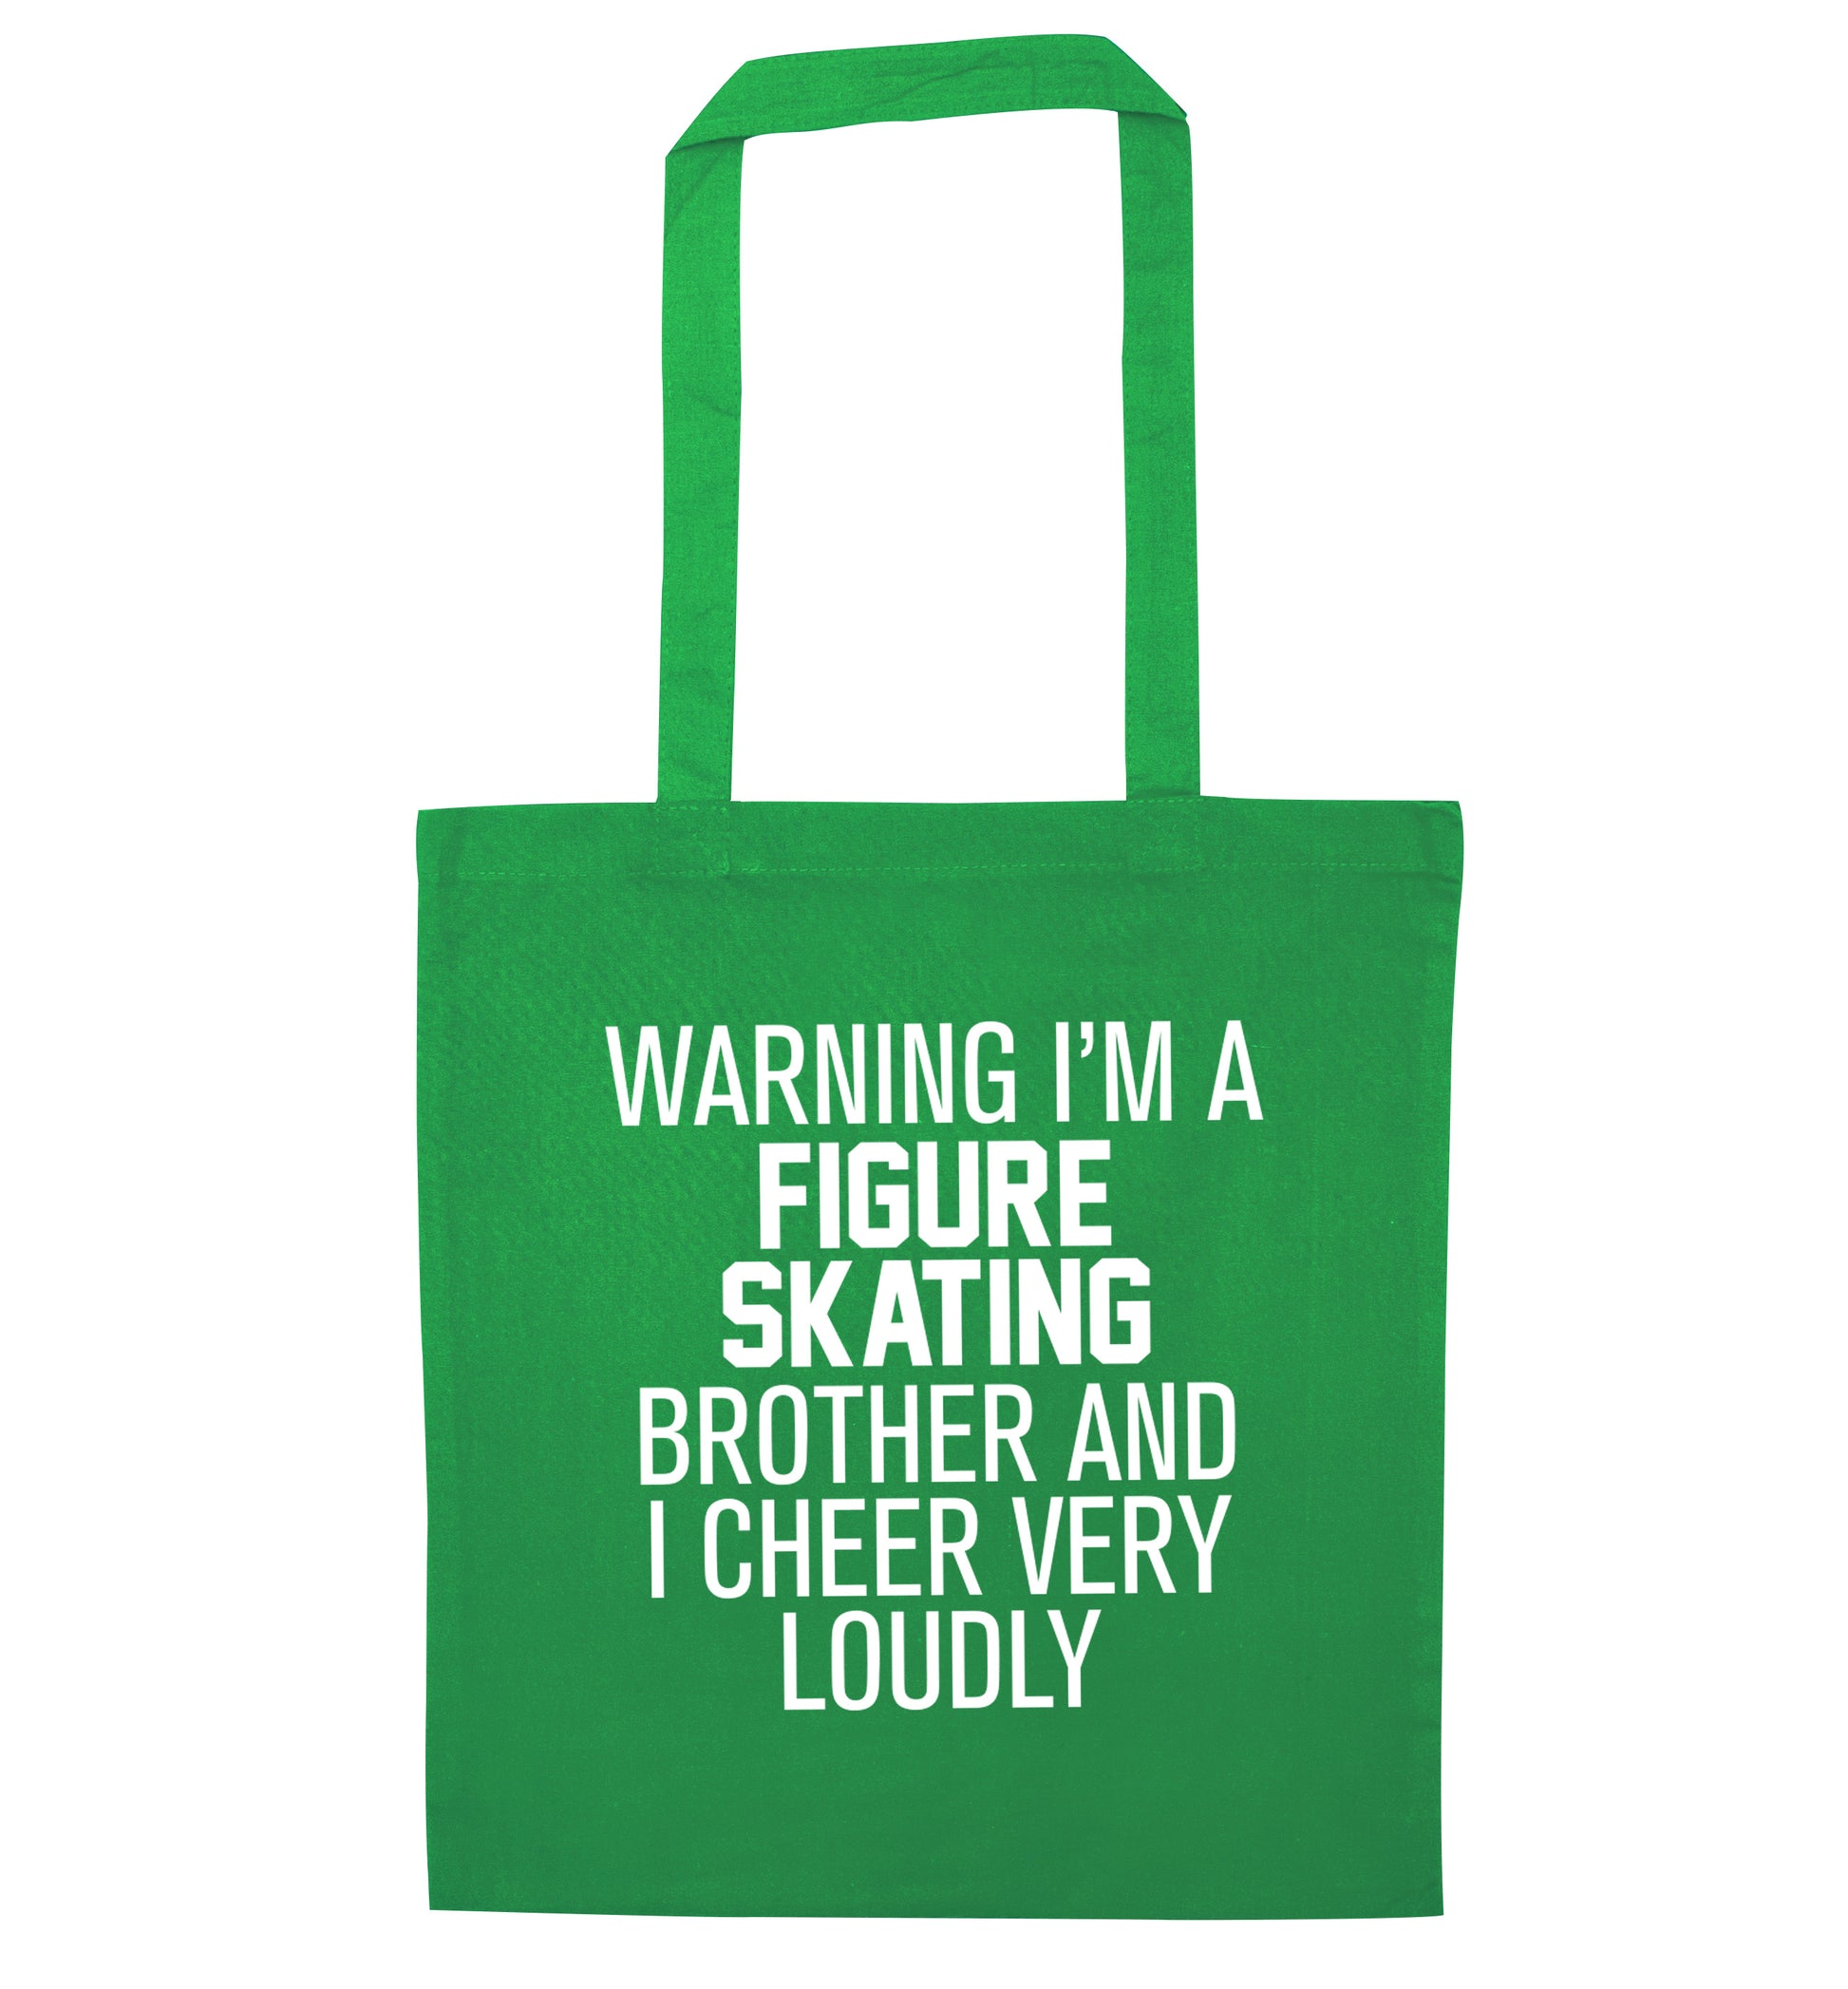 Warning I'm a figure skating brother and I cheer very loudly green tote bag